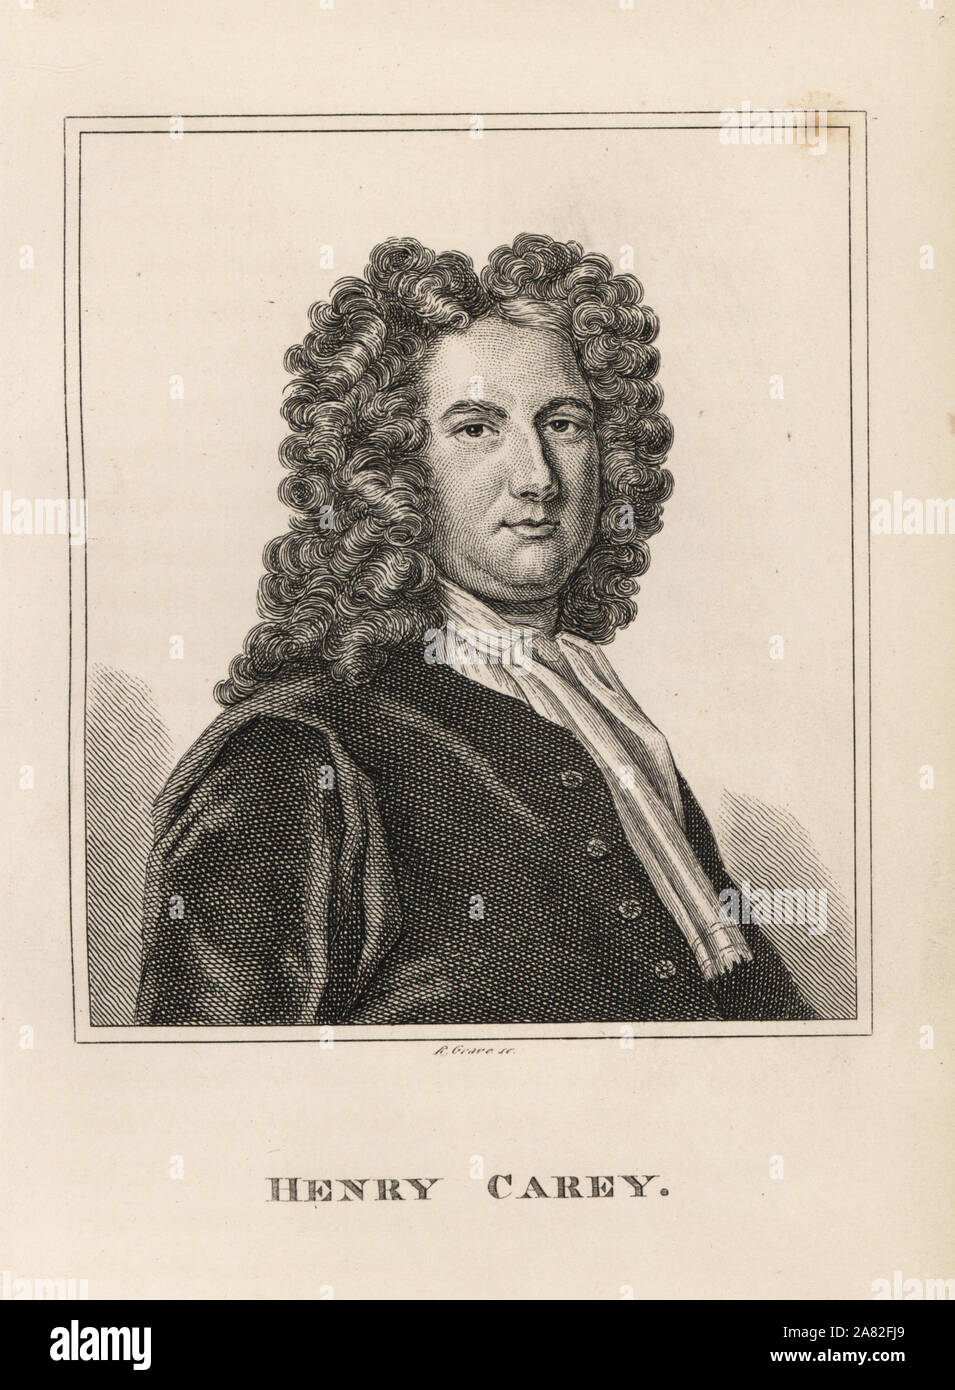 Henry Carey, illegimate son of George Saville, Marquis of Halifax, writer and composer. Engraving by R. Grave from James Caulfield's Portraits, Memoirs and Characters of Remarkable Persons, London, 1819. Stock Photo